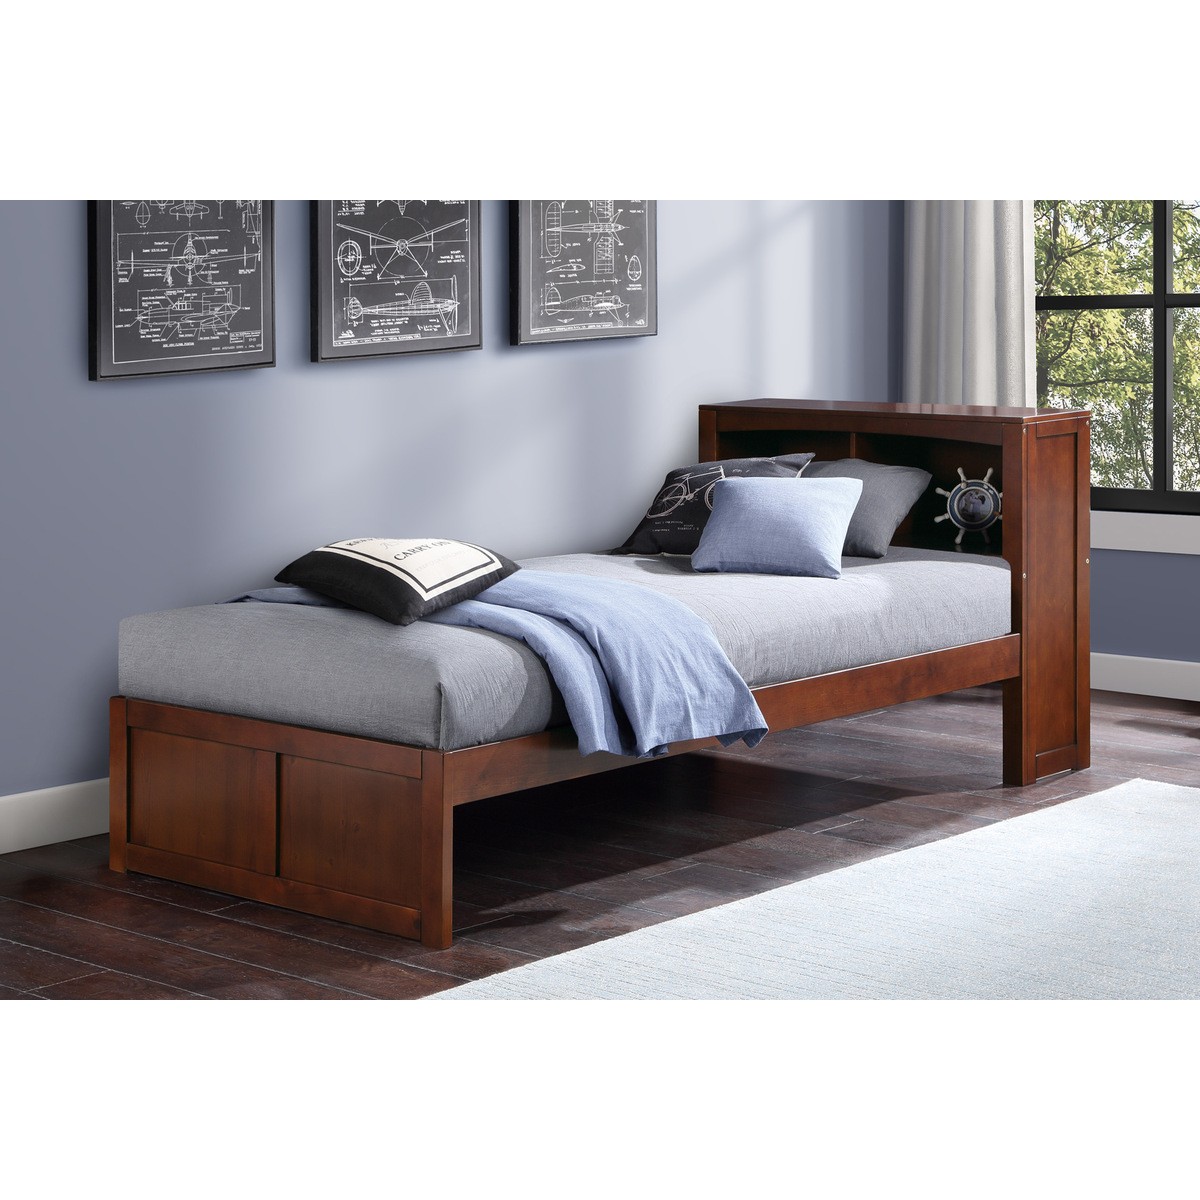 B2013bcdc 1 twin bookcase bed